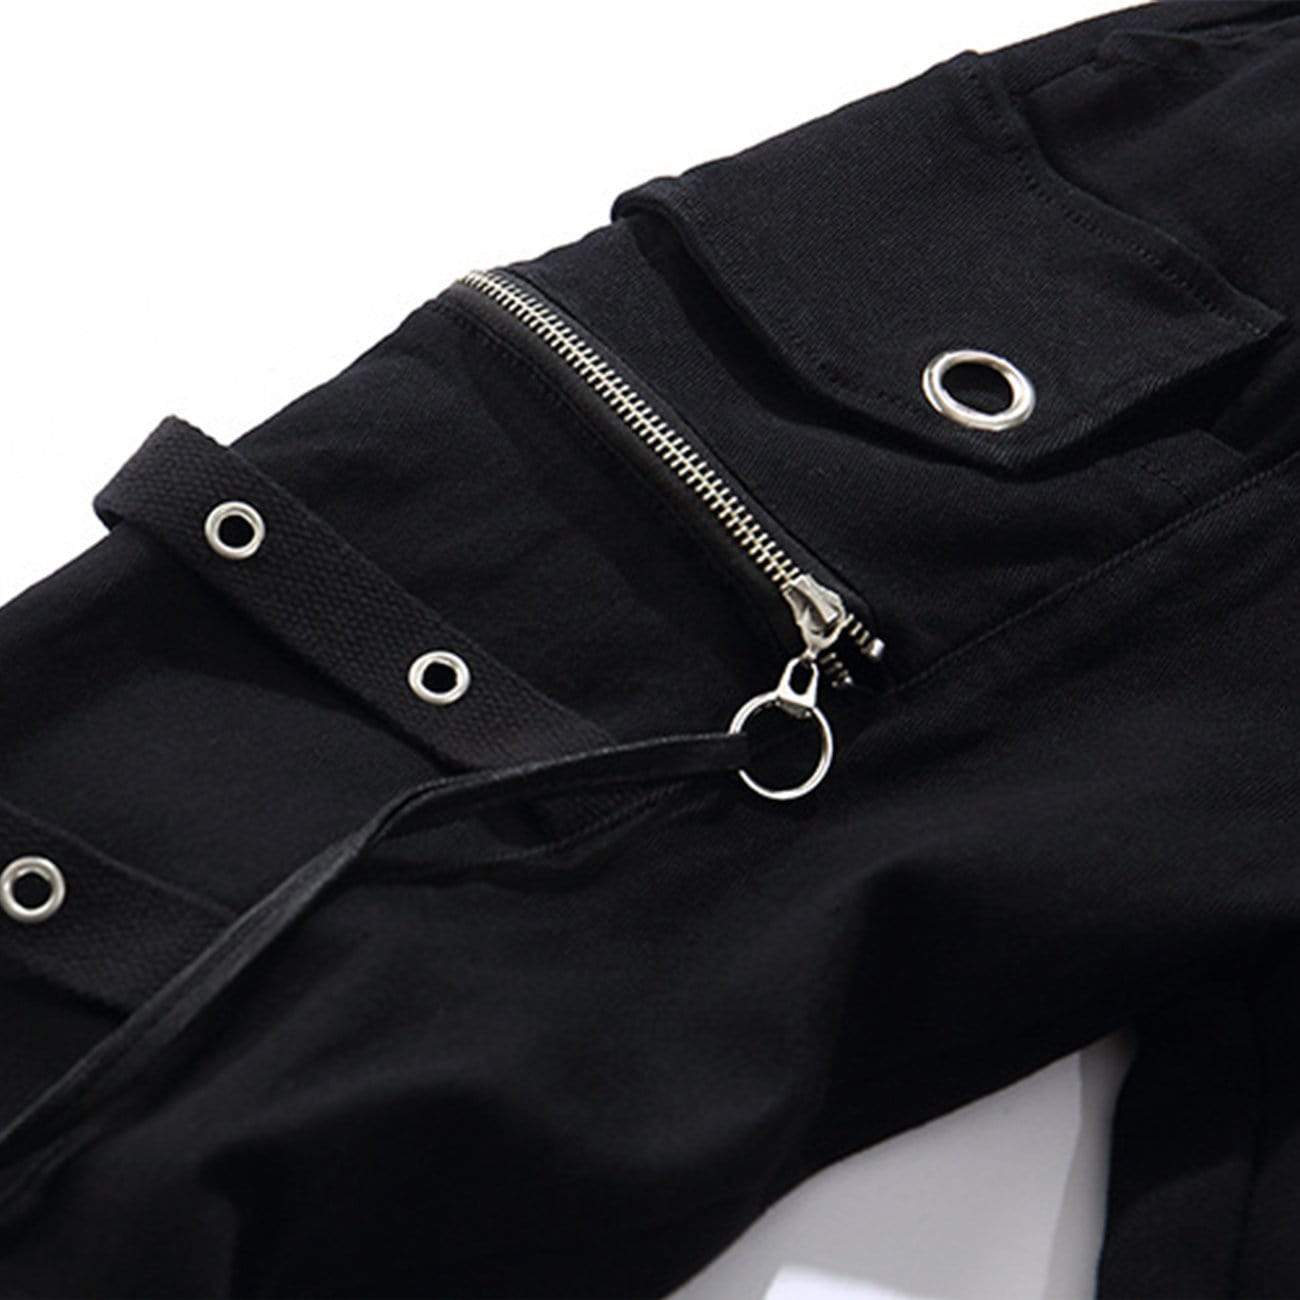 TO Zippers Multi Pockets Ring Pants